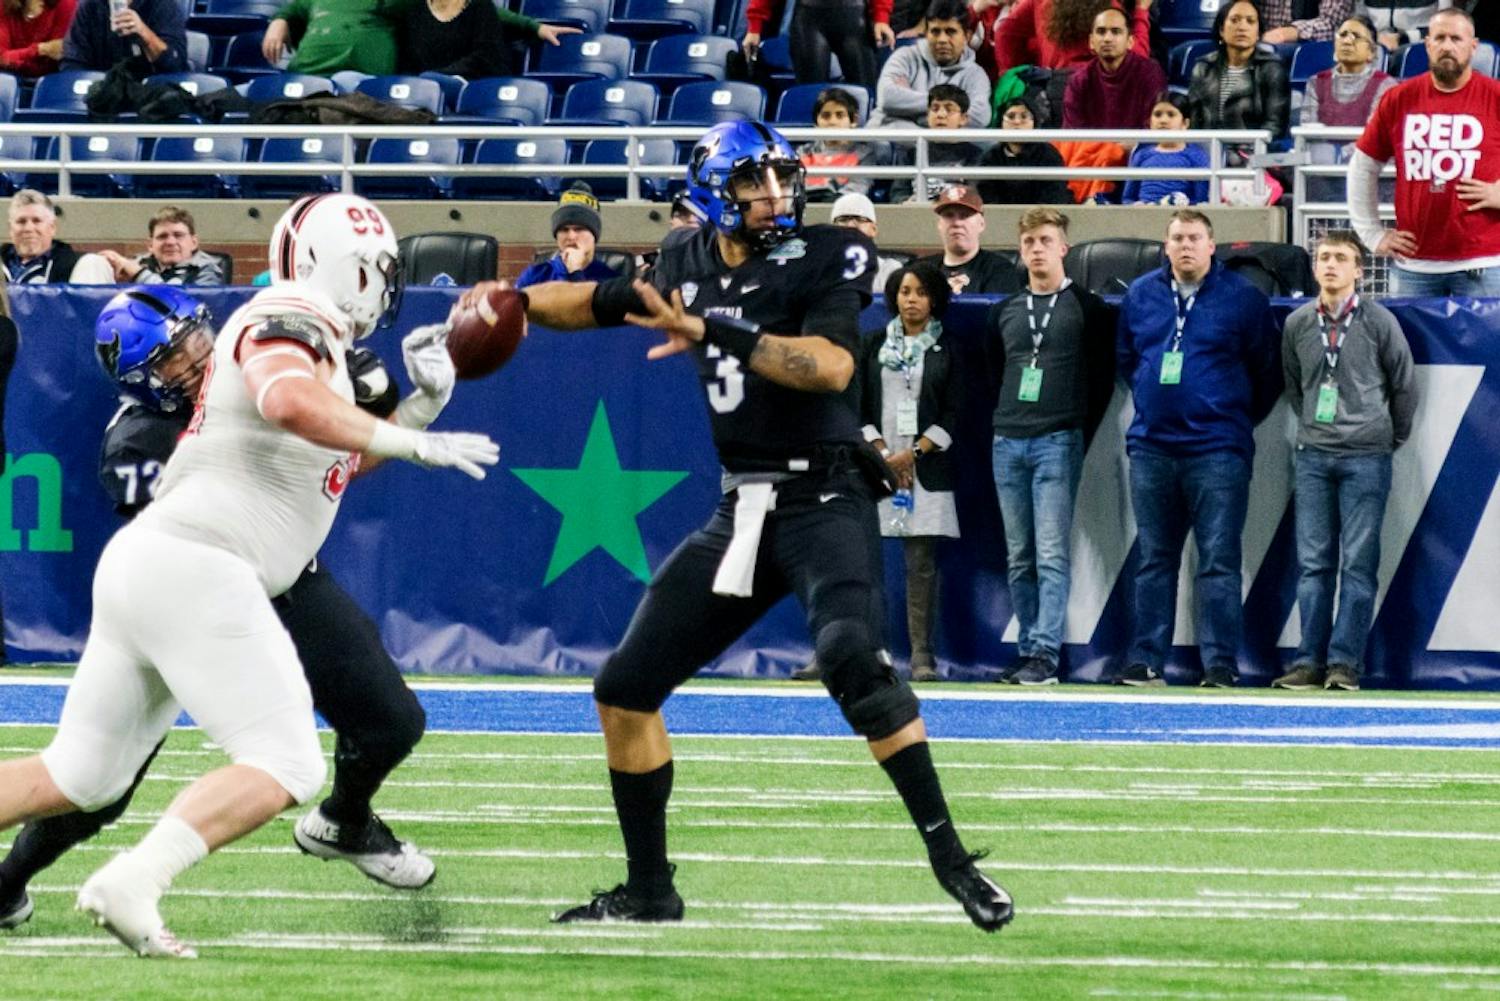 Tyree Jackson sets for a throw during the MAC Championship game. Jackson blew scouts away with his physical attributes during the NFL Combine this weekend.